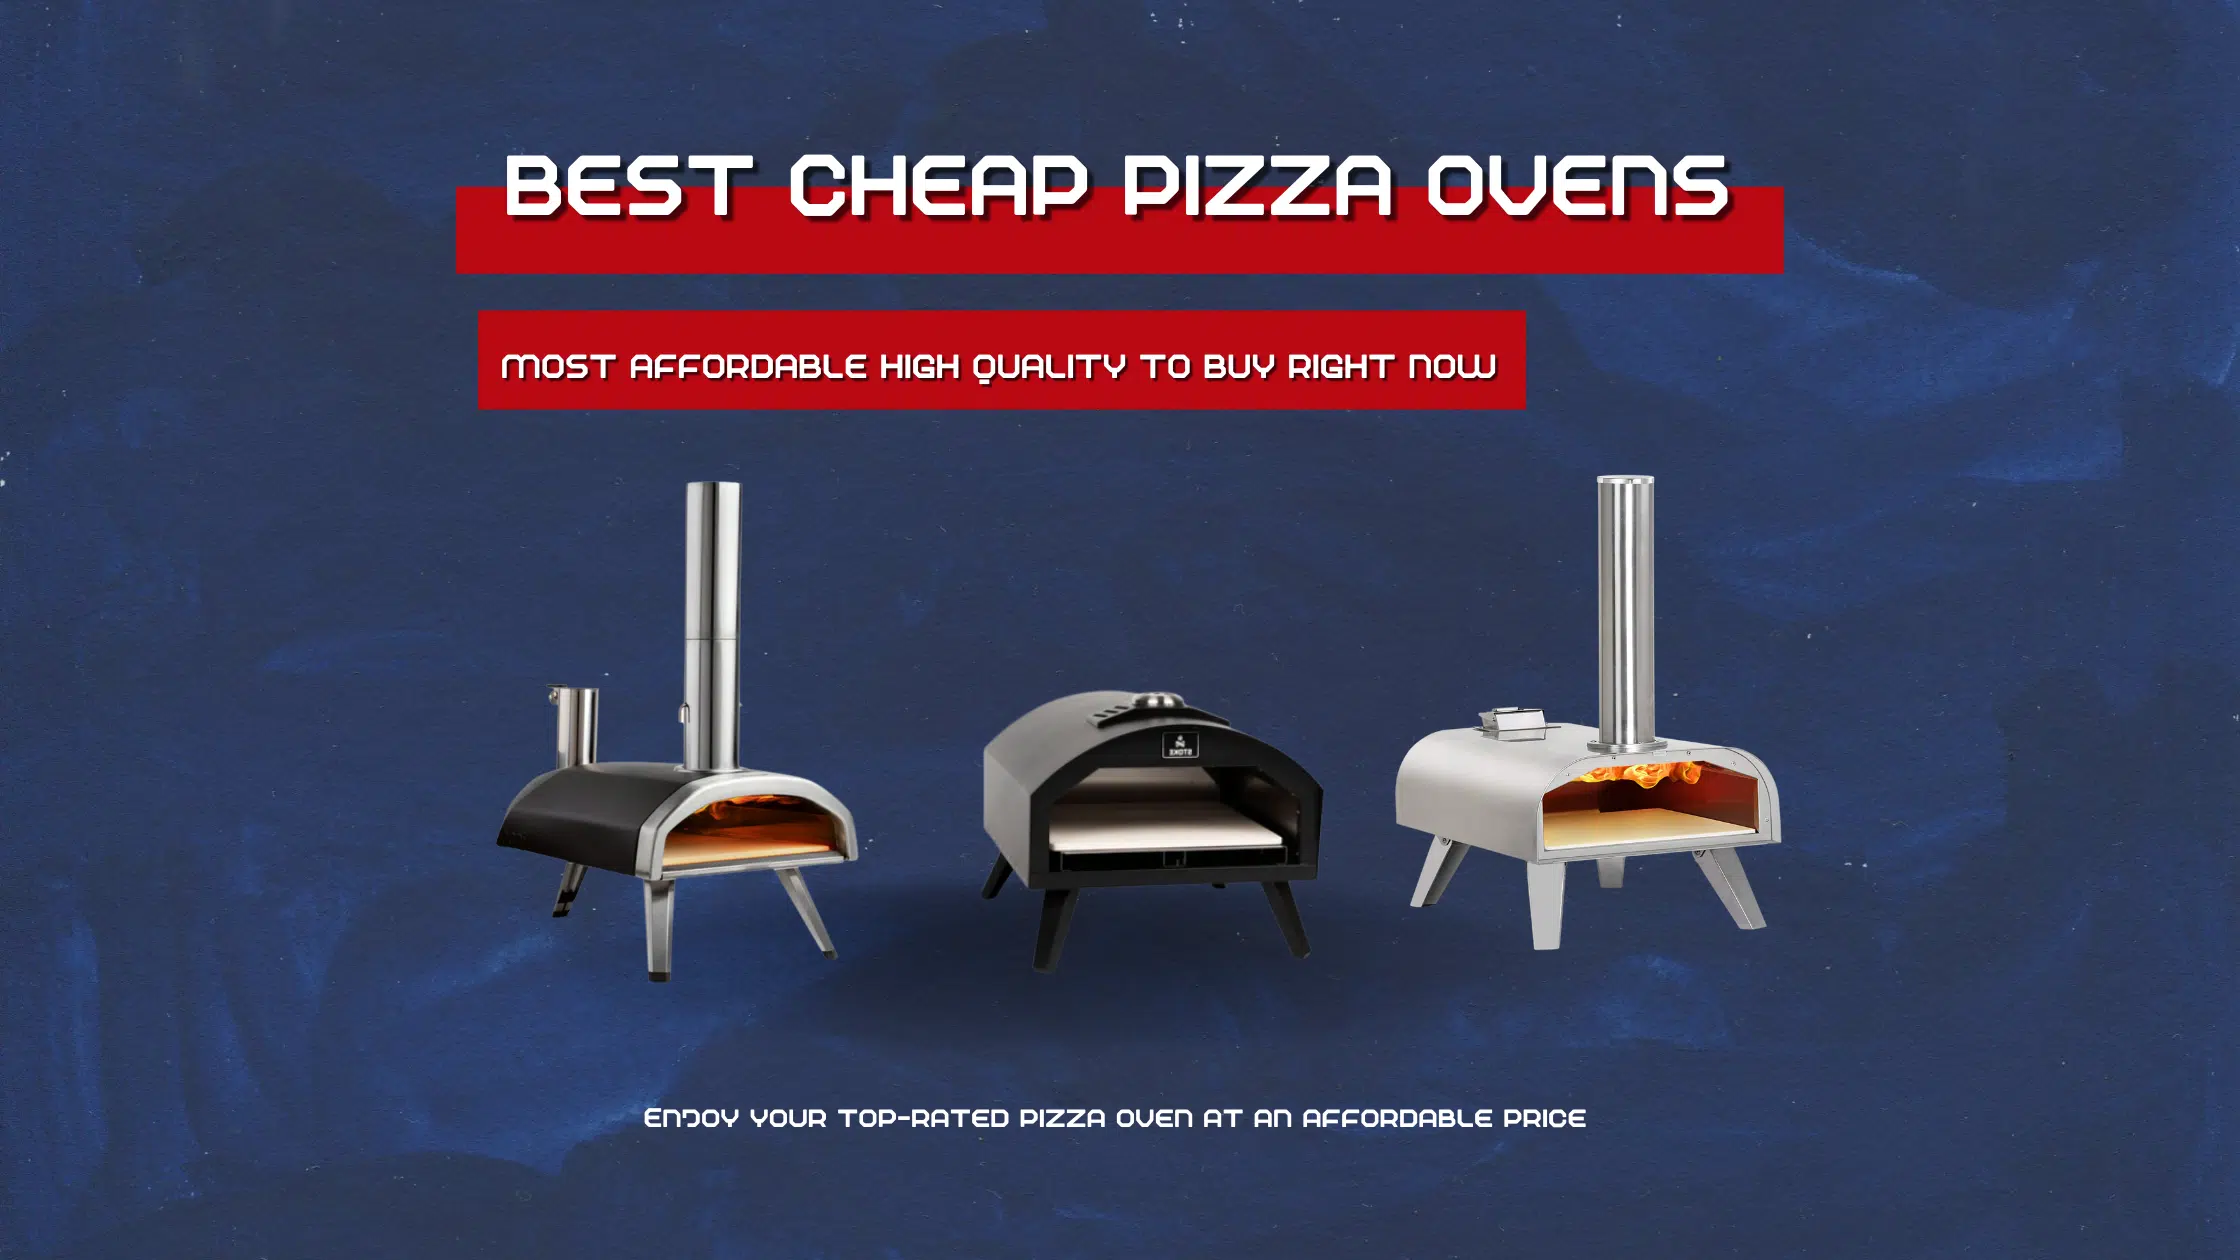 Cheap Pizza Ovens